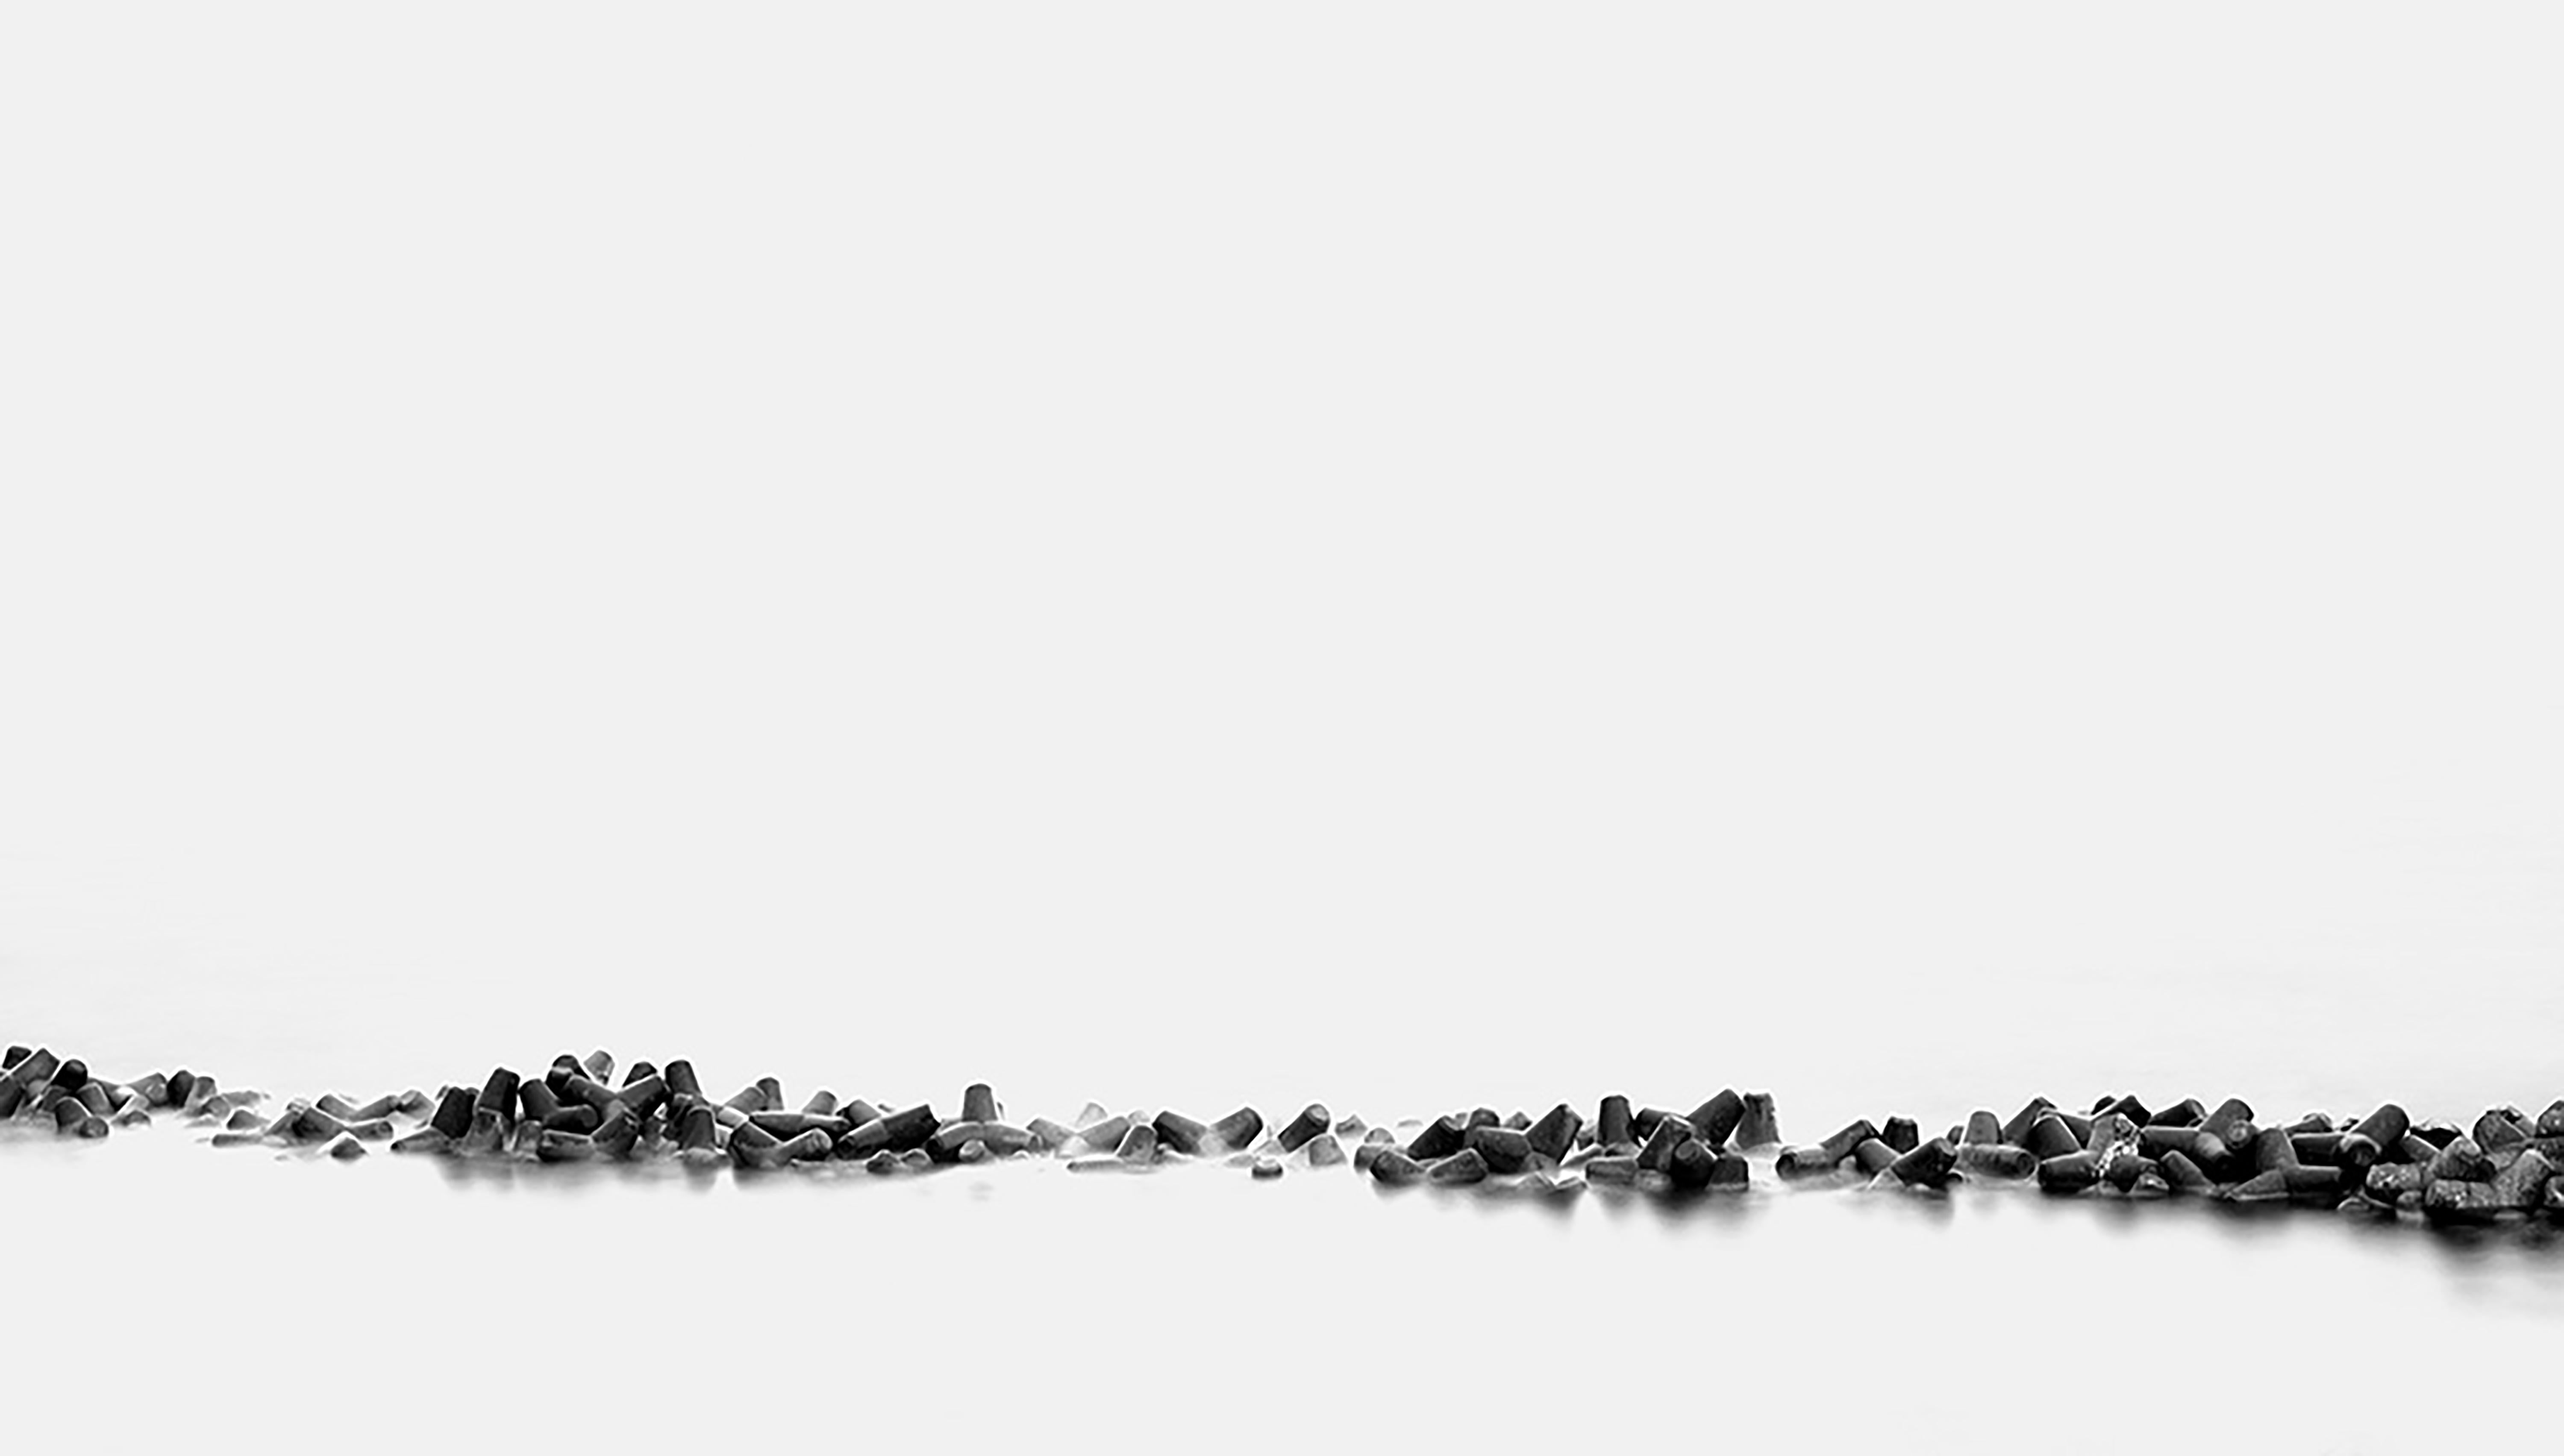 Yeong-Jea Kim Black and White Photograph - Be in Harmony  (63 x 40 in )